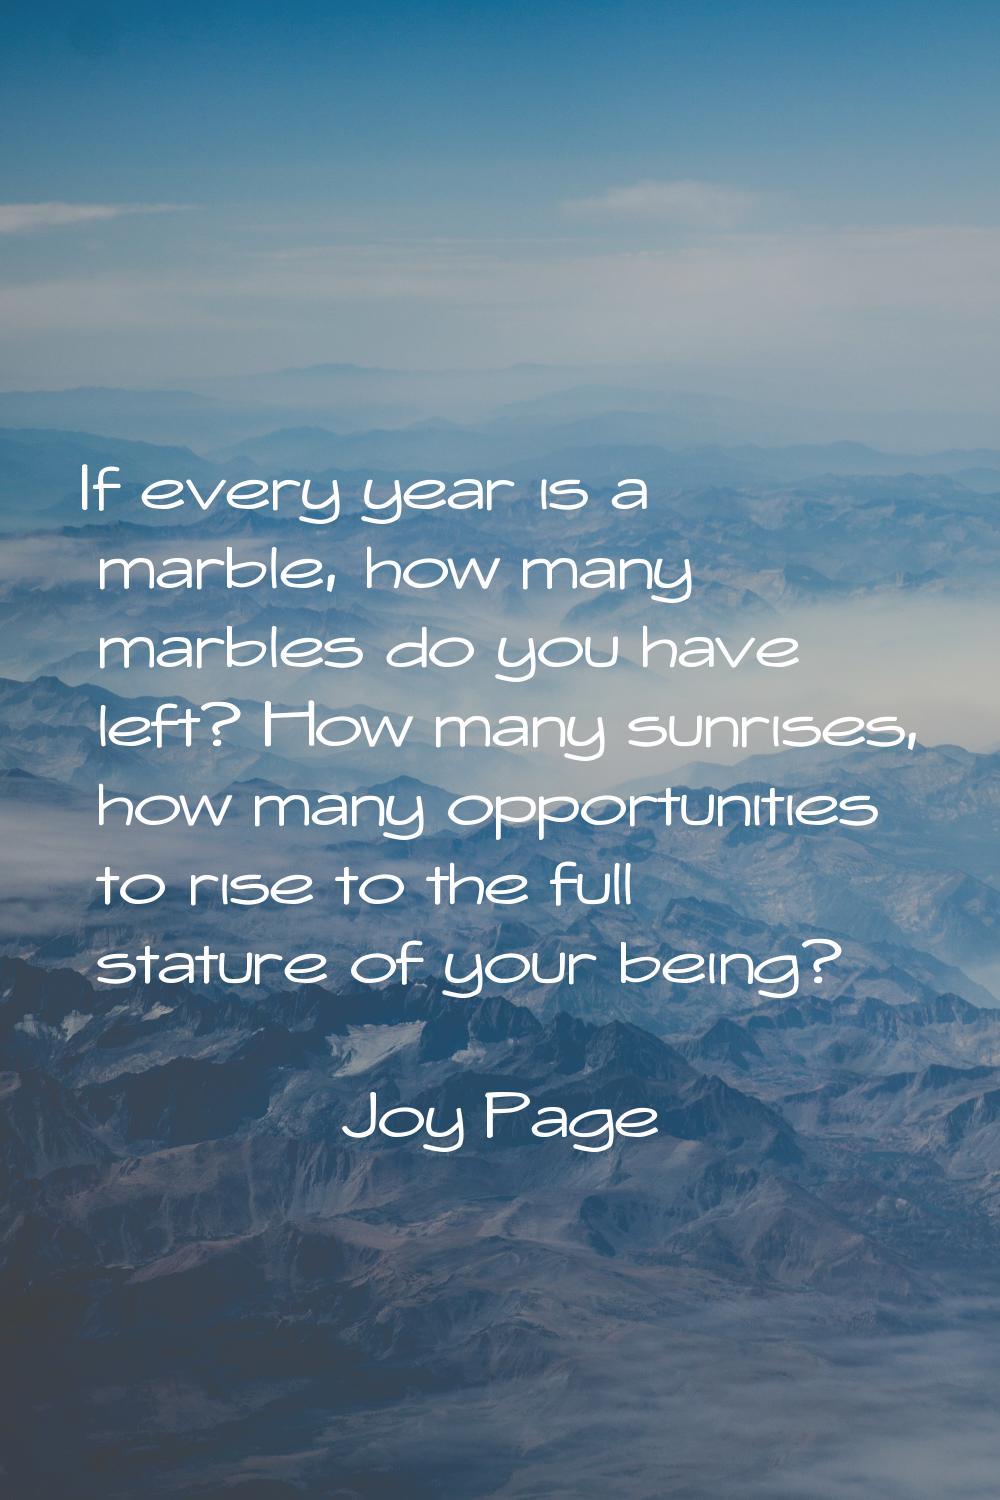 If every year is a marble, how many marbles do you have left? How many sunrises, how many opportuni